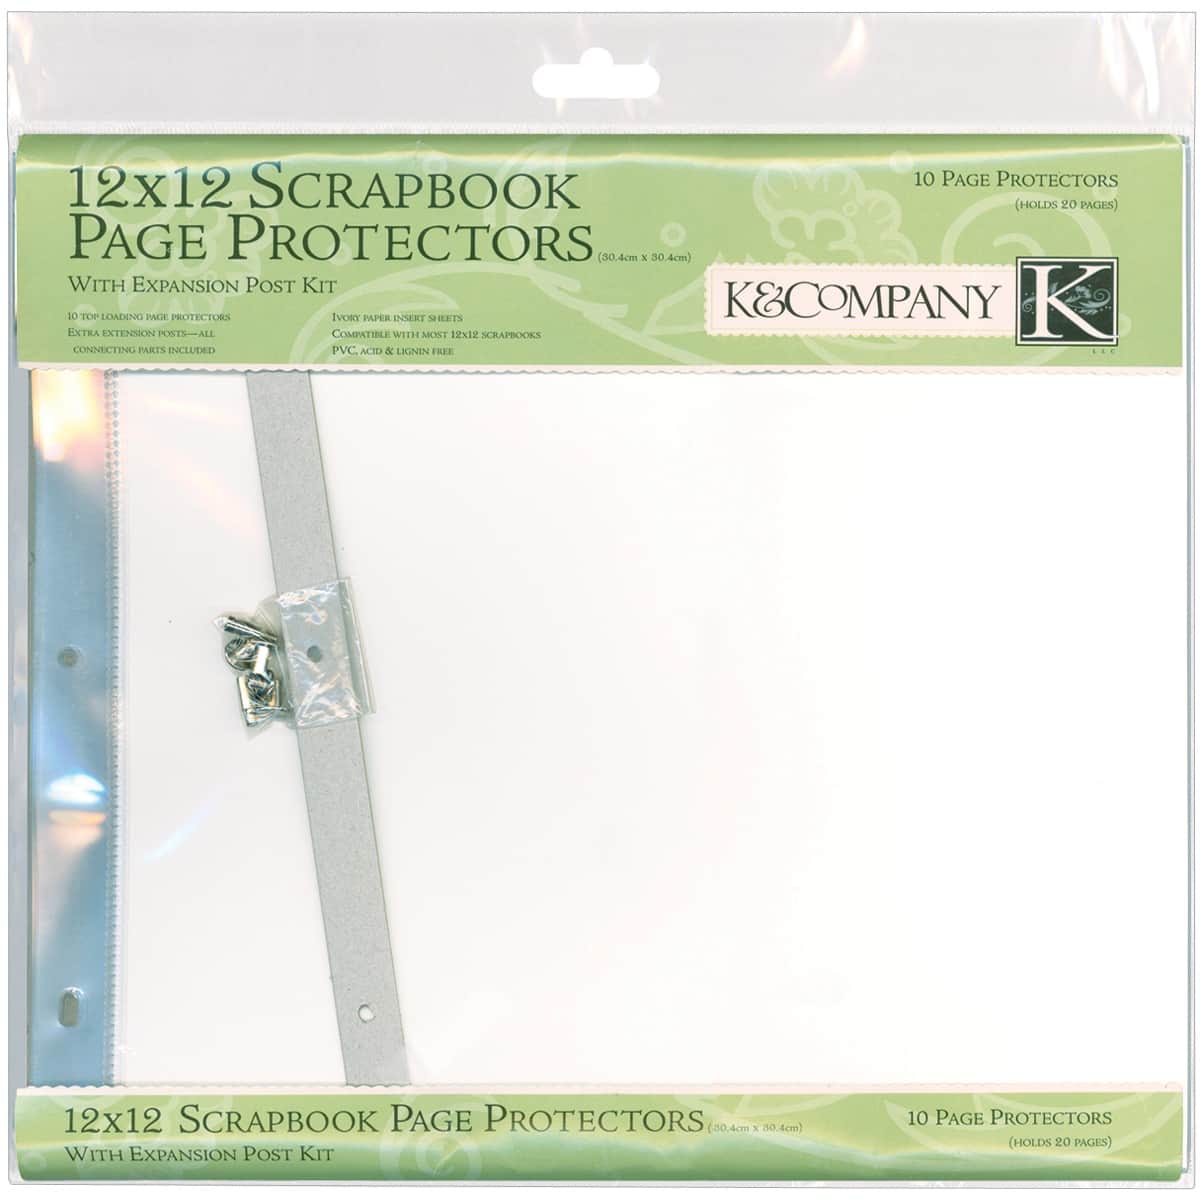 Colorbok Top Loading Page Protectors 12x12 10/Pkg w/3 Post Extenders